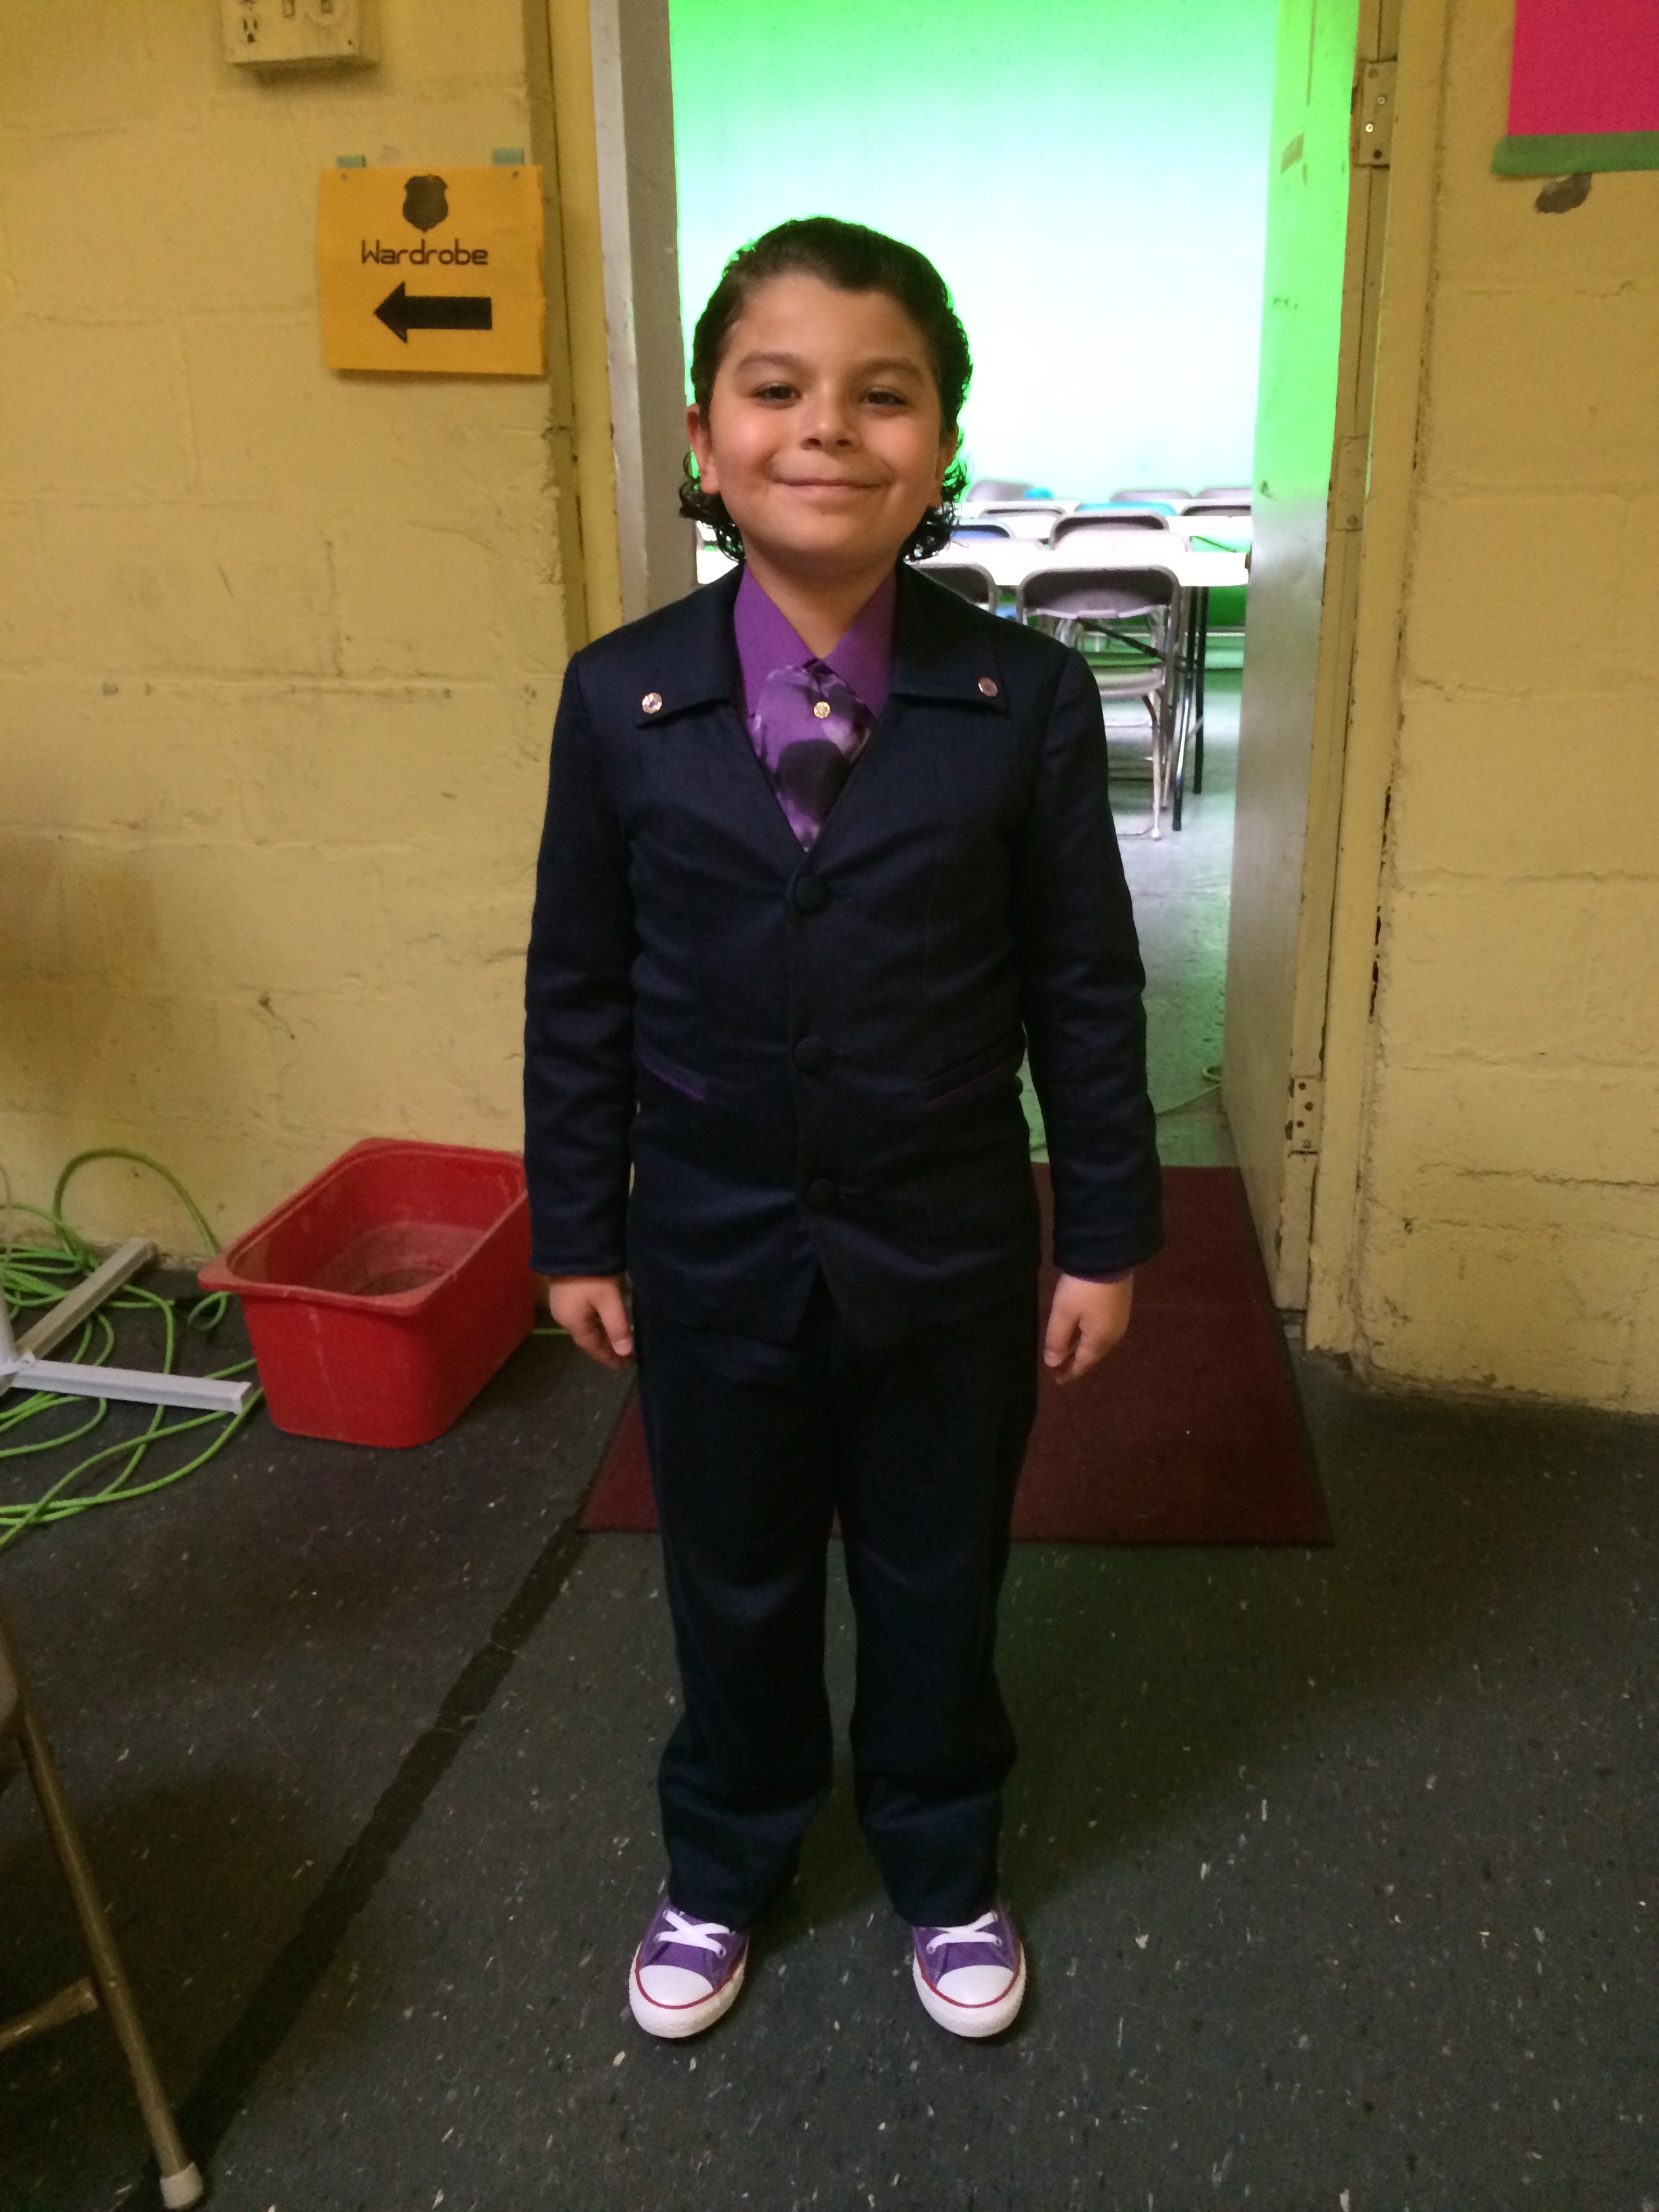 Bruce as Mr. O onset of ODD SQUAD